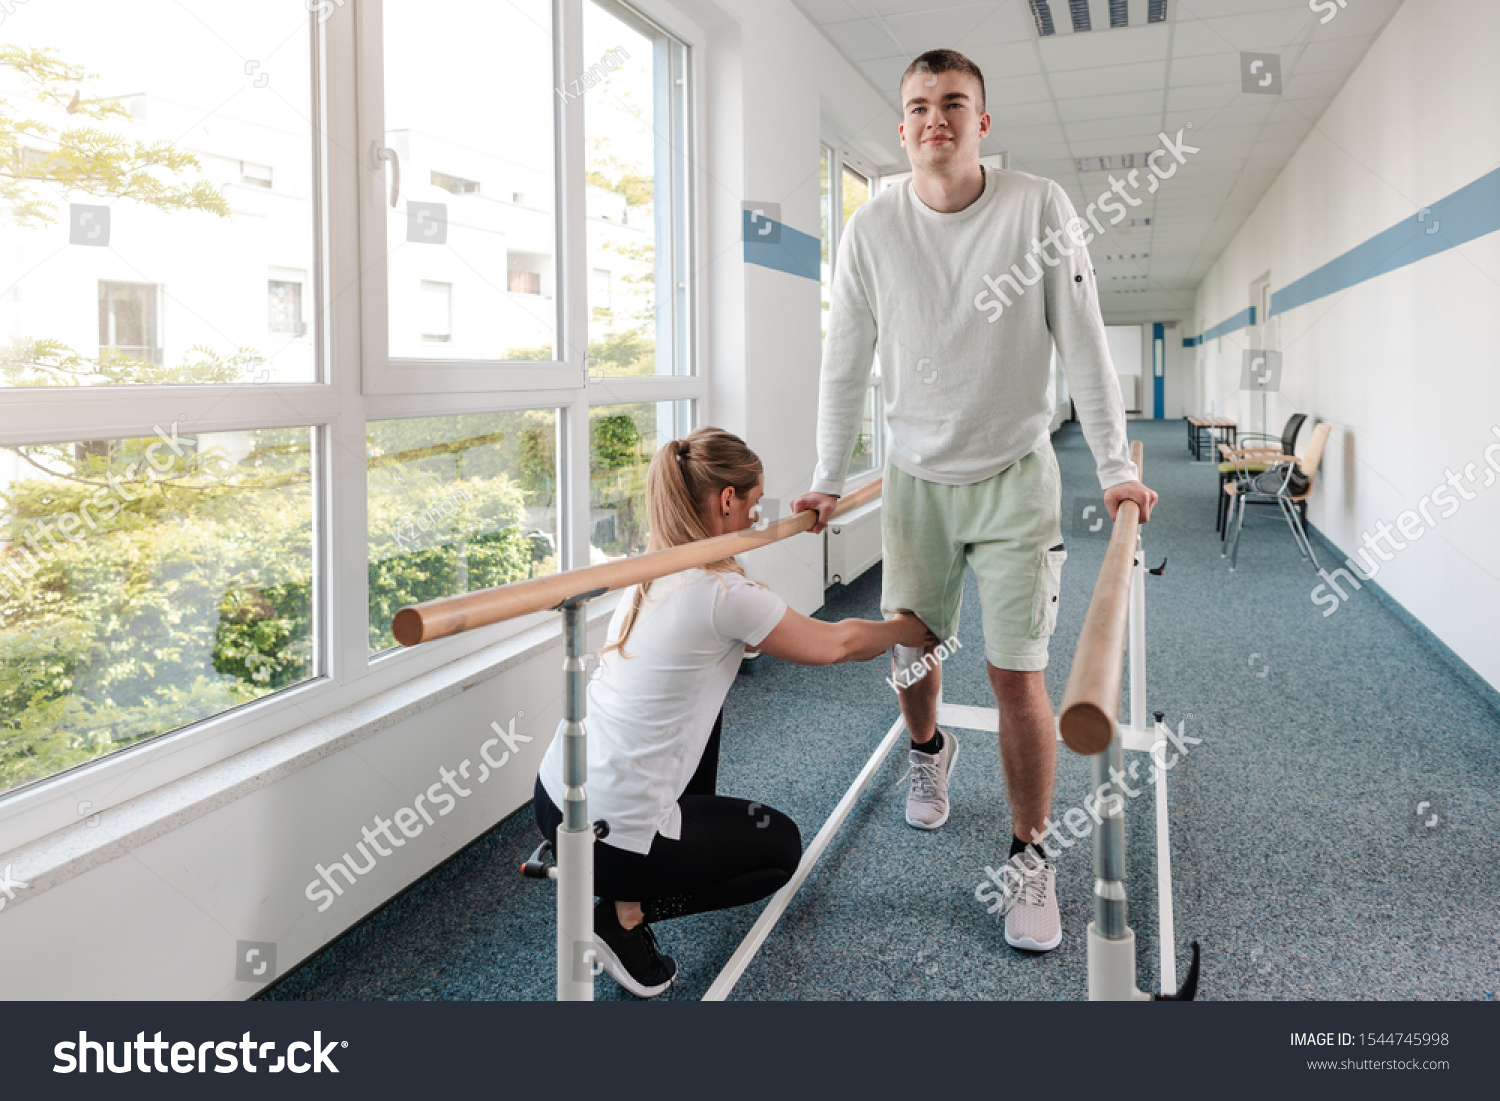 Young man in walking rehabilitation course after a sport injury on his knee #1544745998